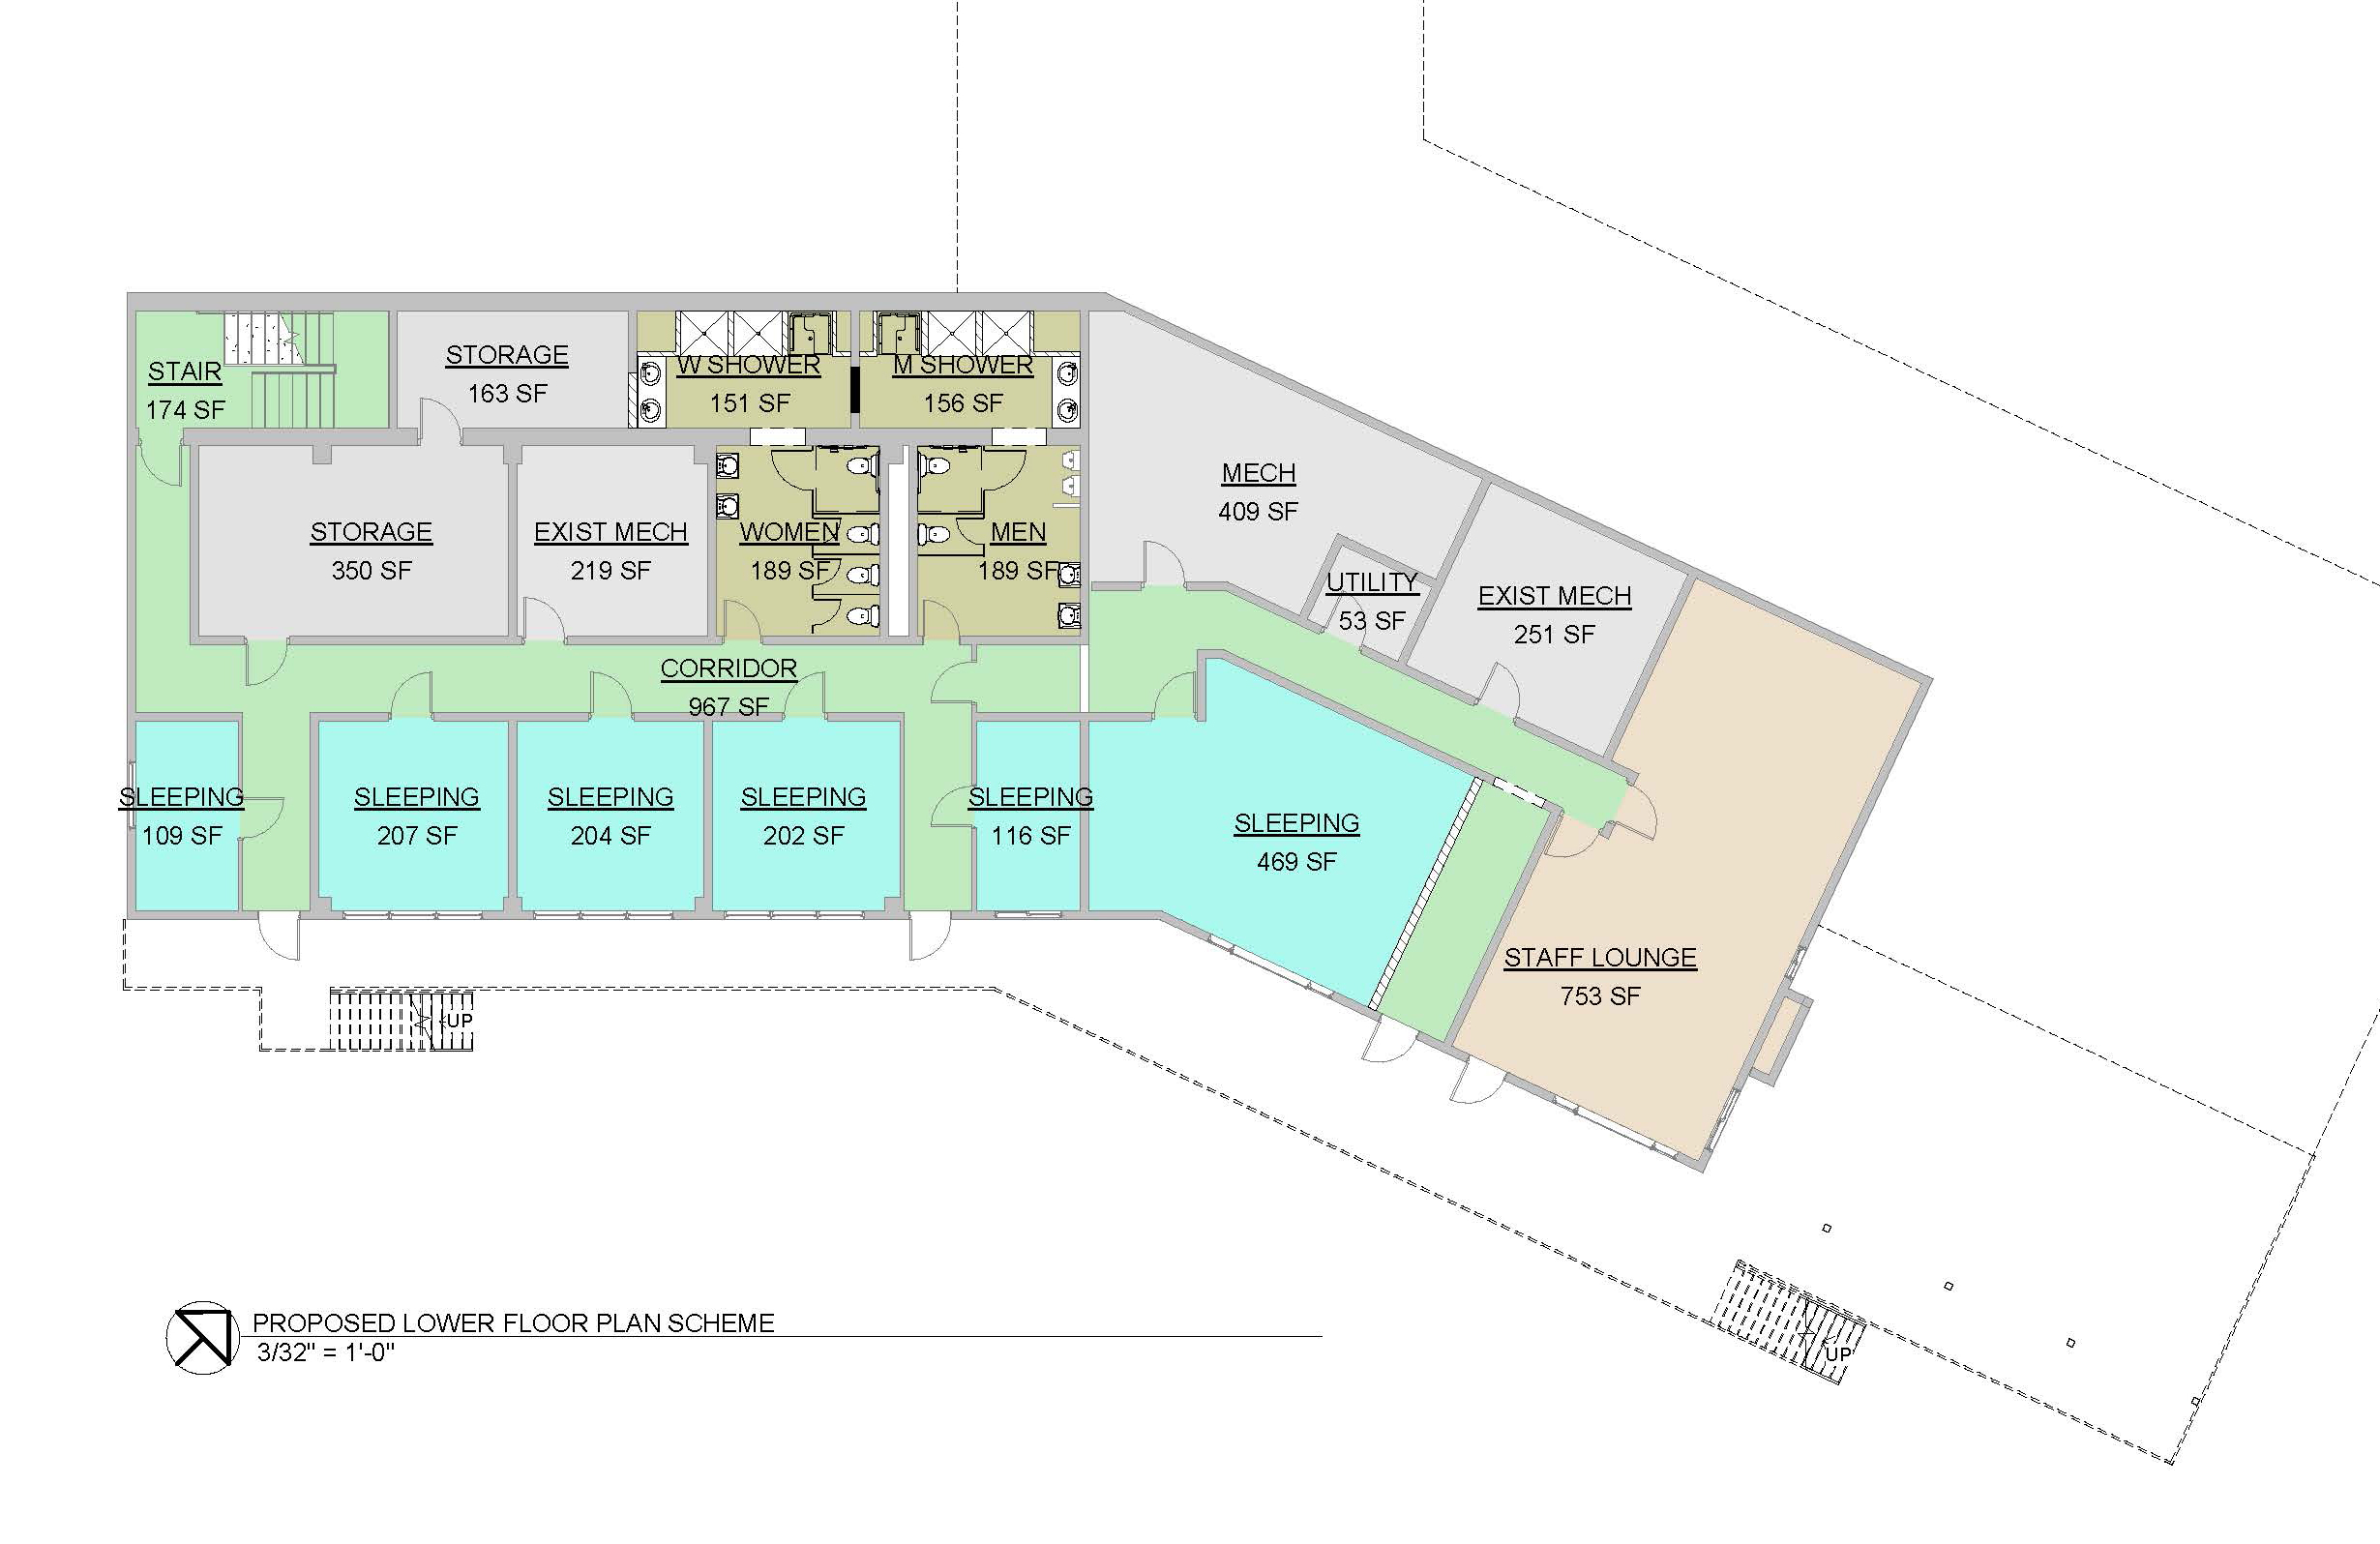 Architect's plans for the lower level include remodeled bathrooms and a remodeled break area for summer staff.